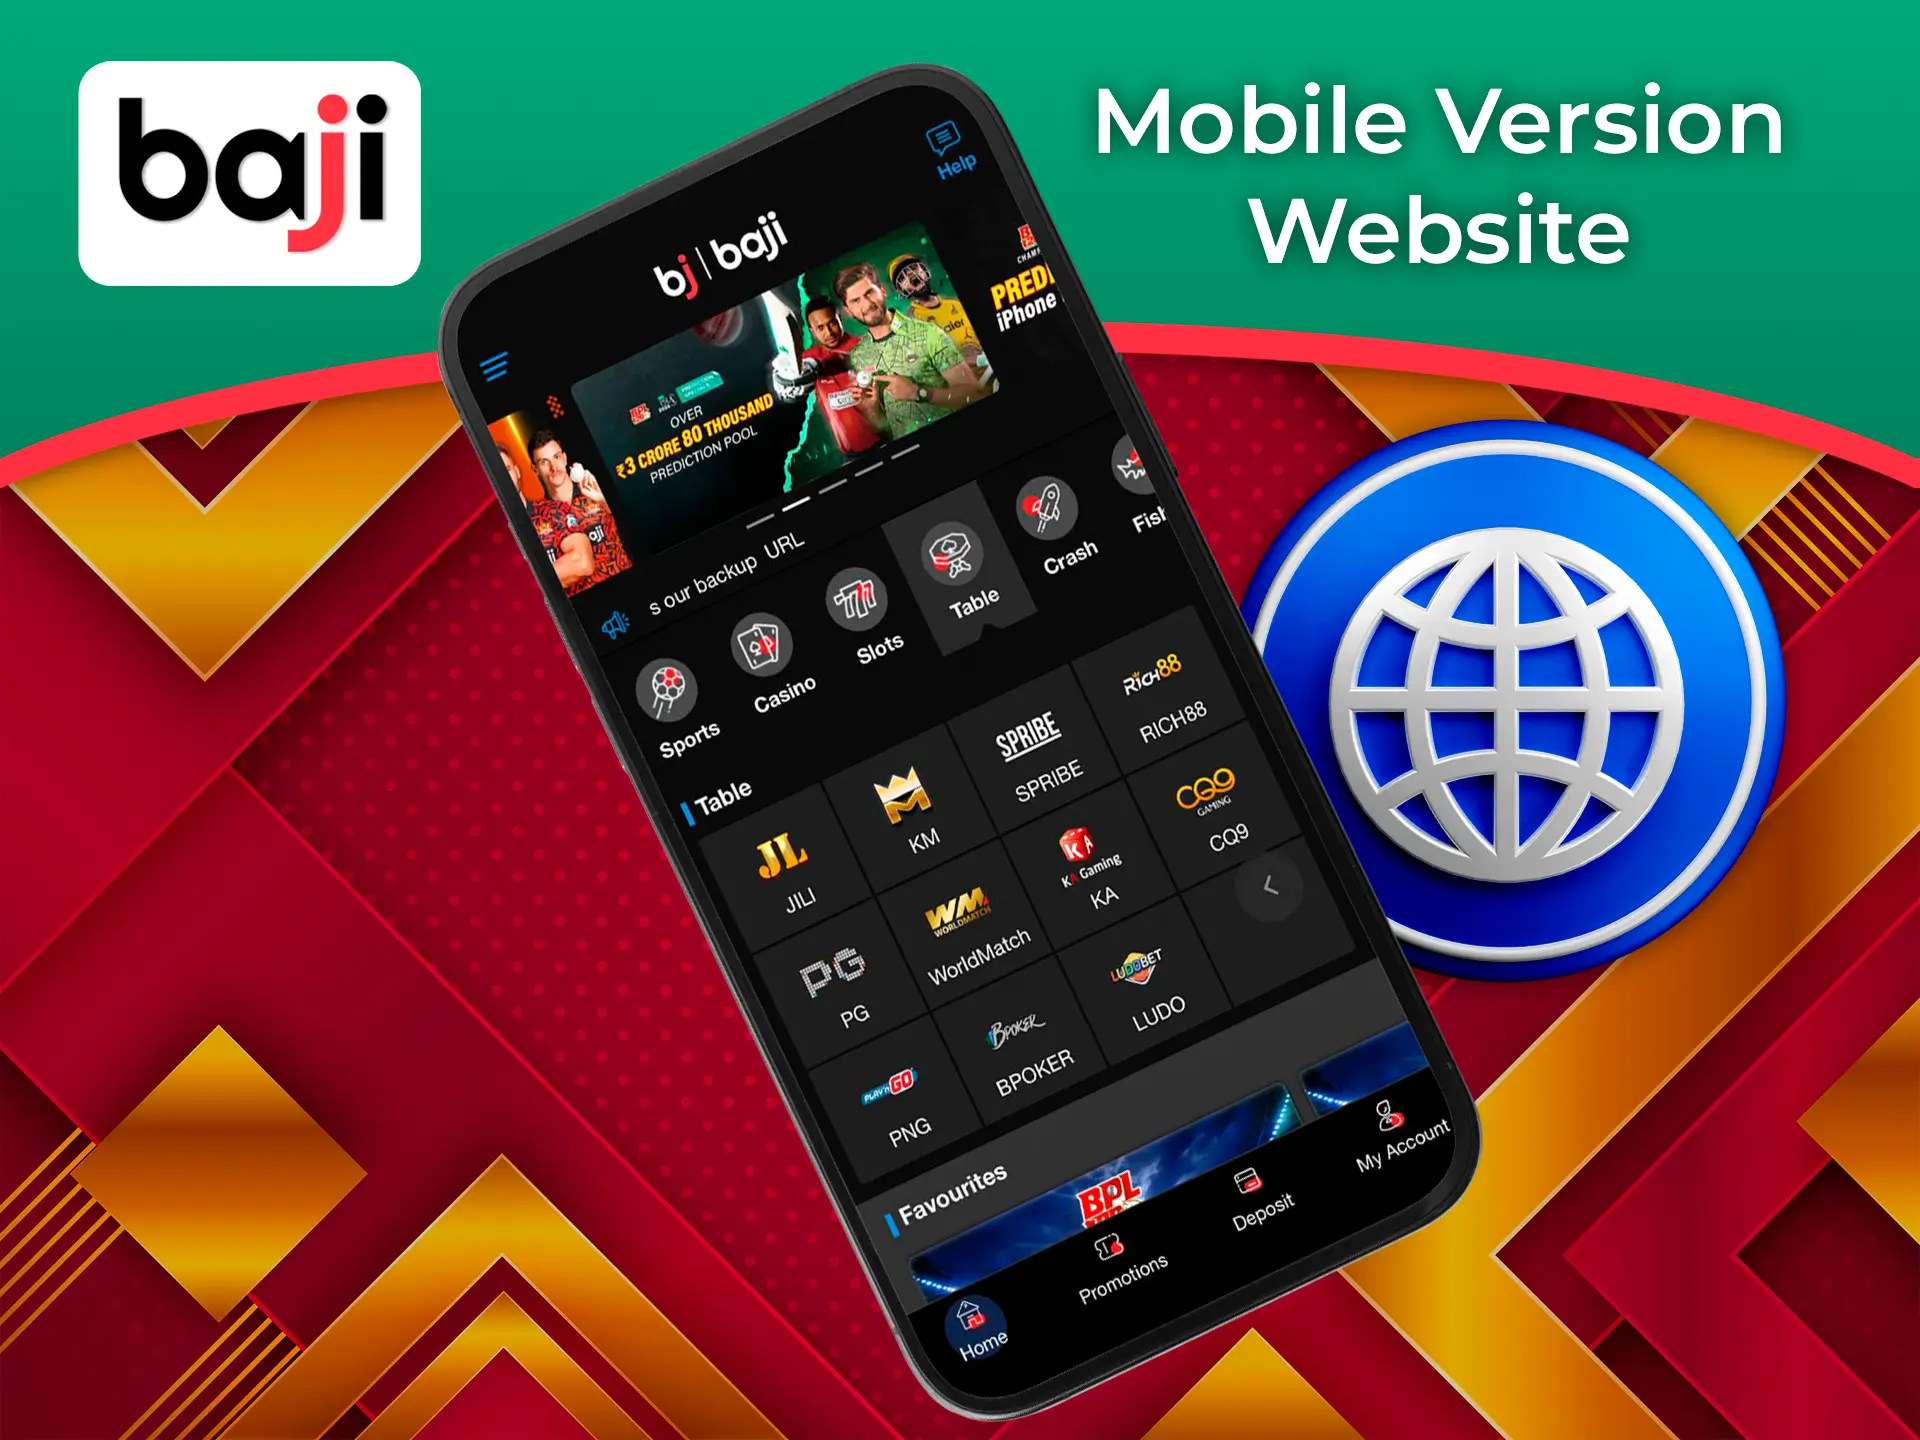 Use the mobile version of the Baji website to get instant access to betting and casino games.